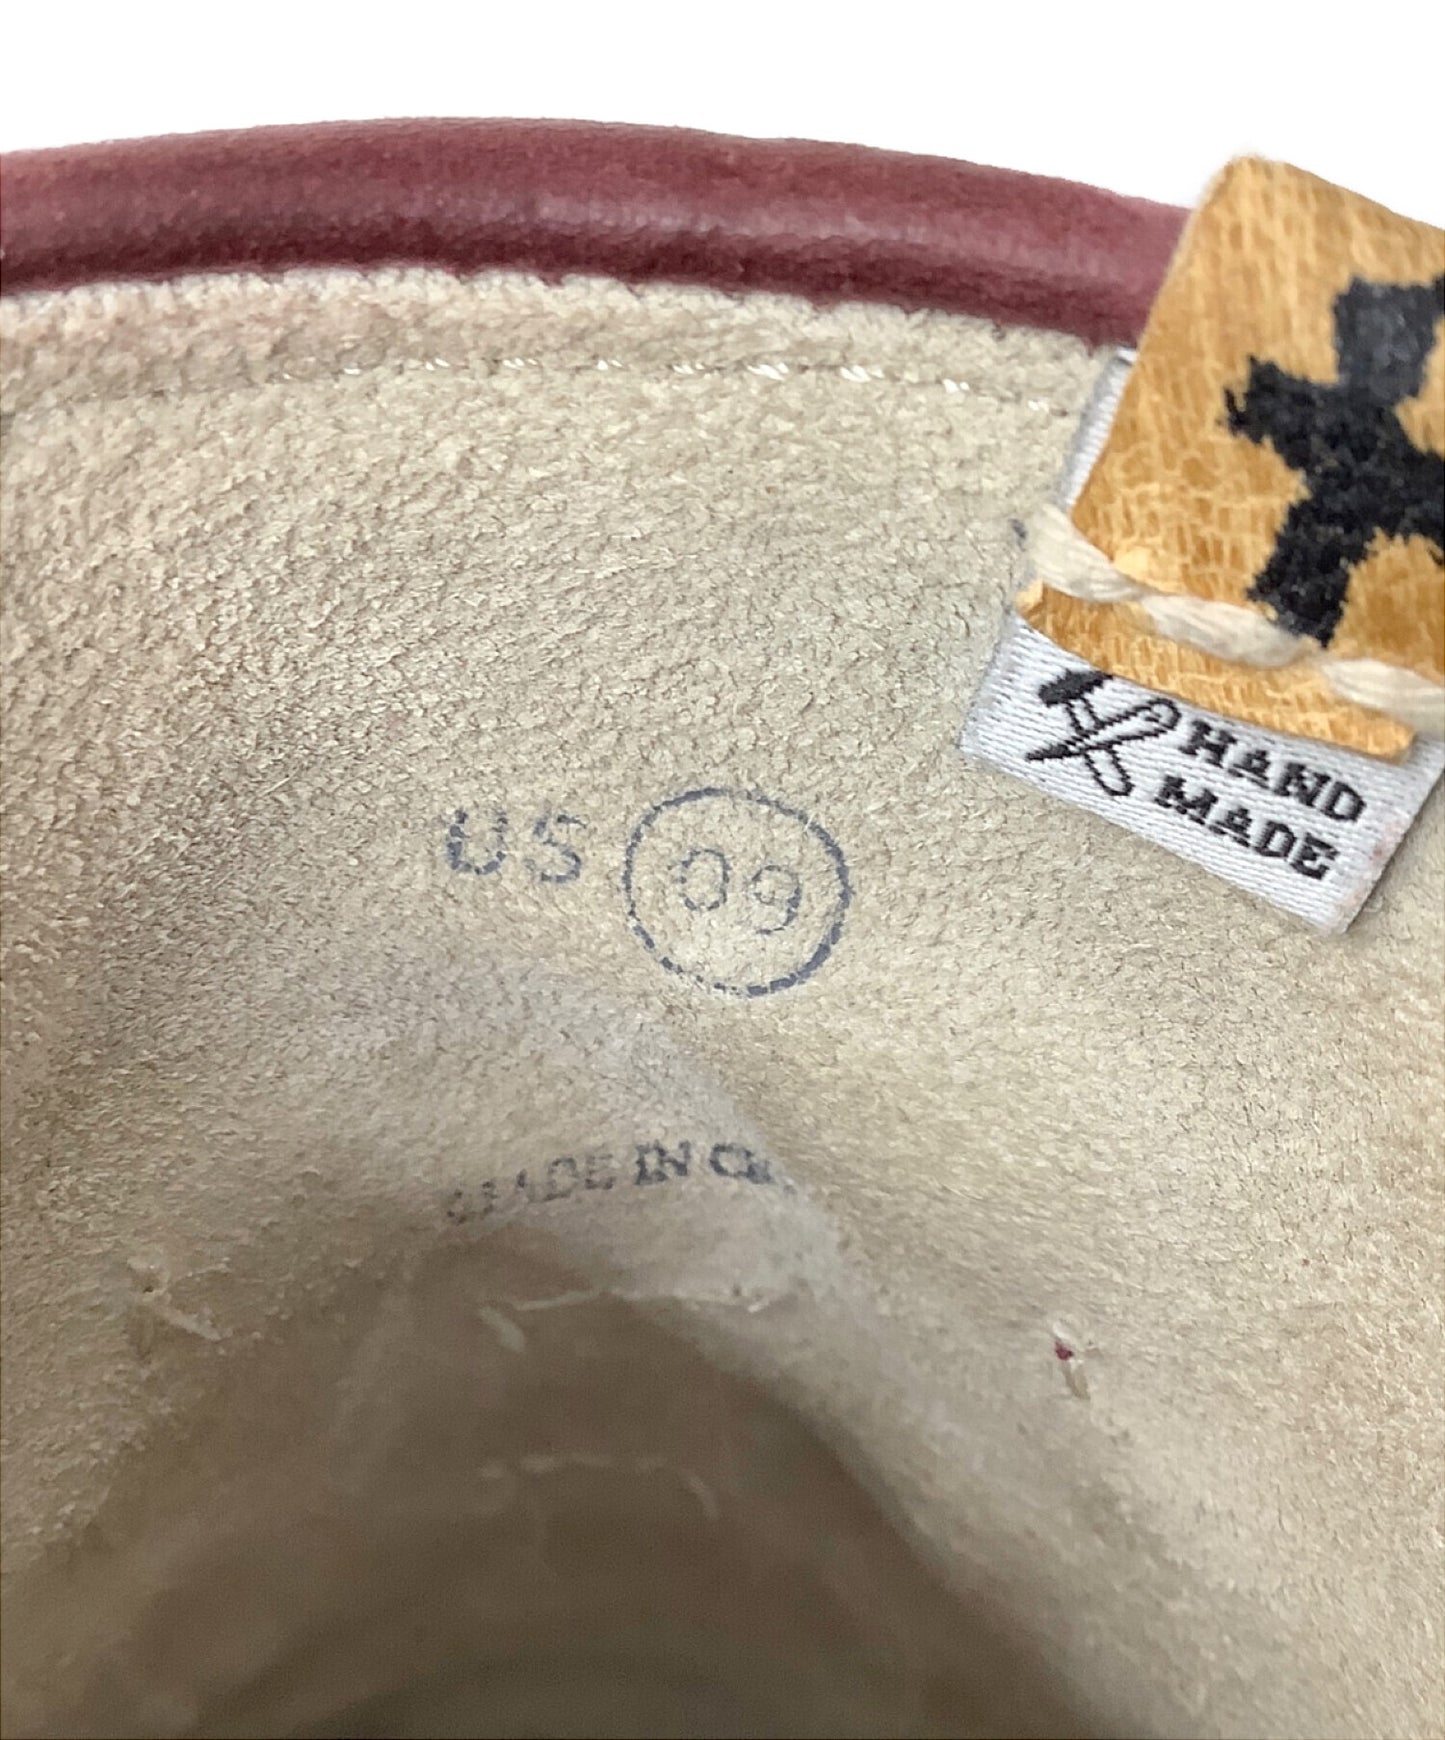 [Pre-owned] VISVIM Leather Sneakers